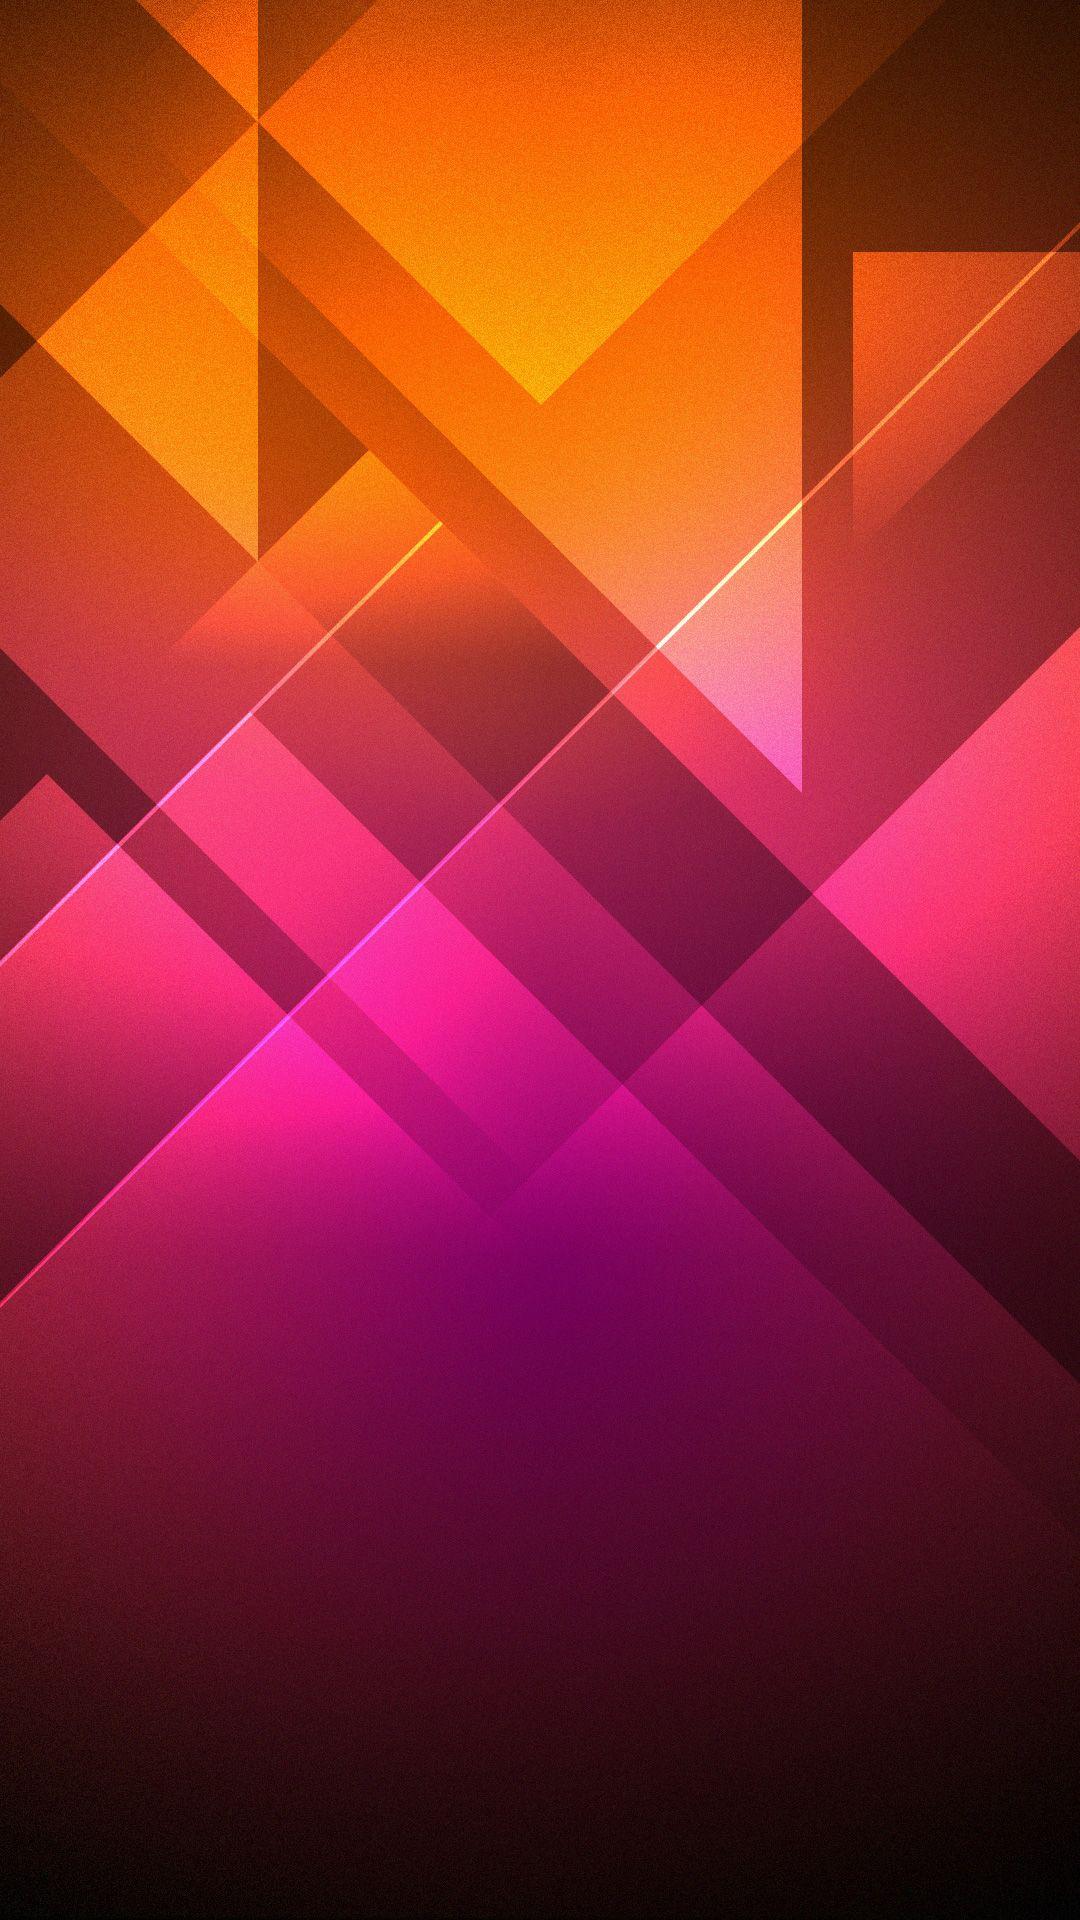 Wallpaper Note 3 Full HD 1080 1920 Abstract x 1920